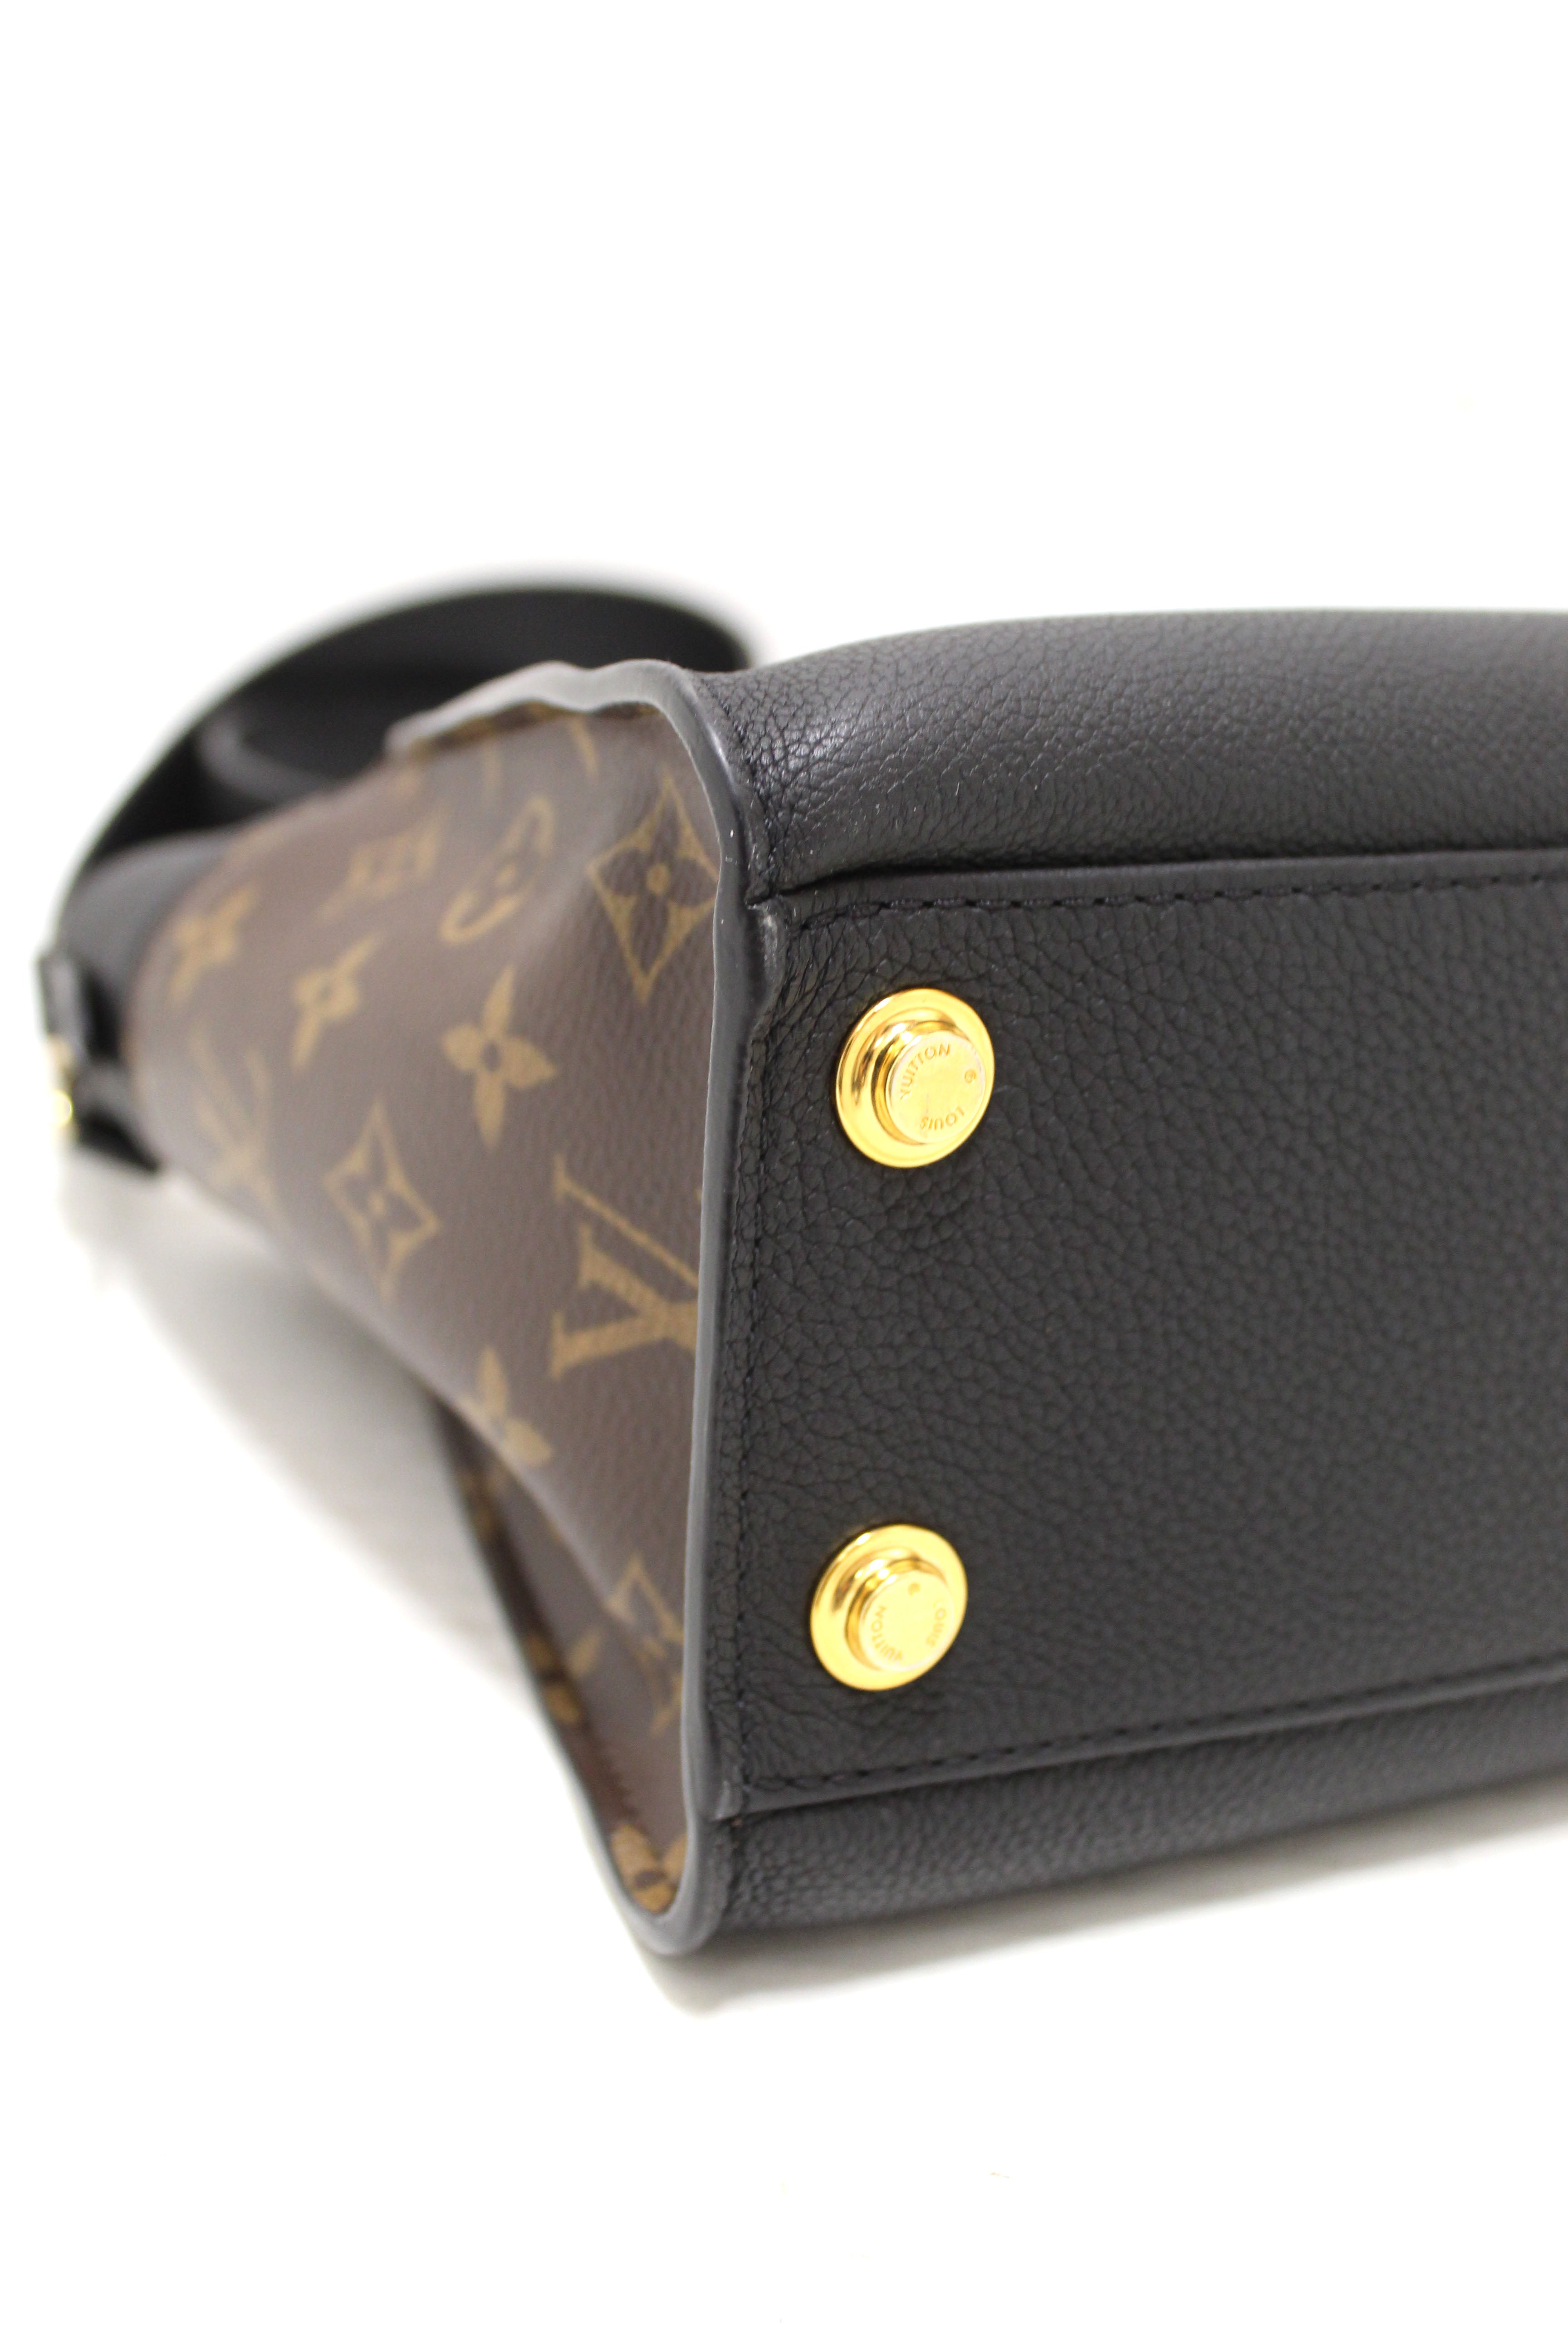 Authentic Louis Vuitton Monogram and Black On My Side PM Hand/Crossbody Bag